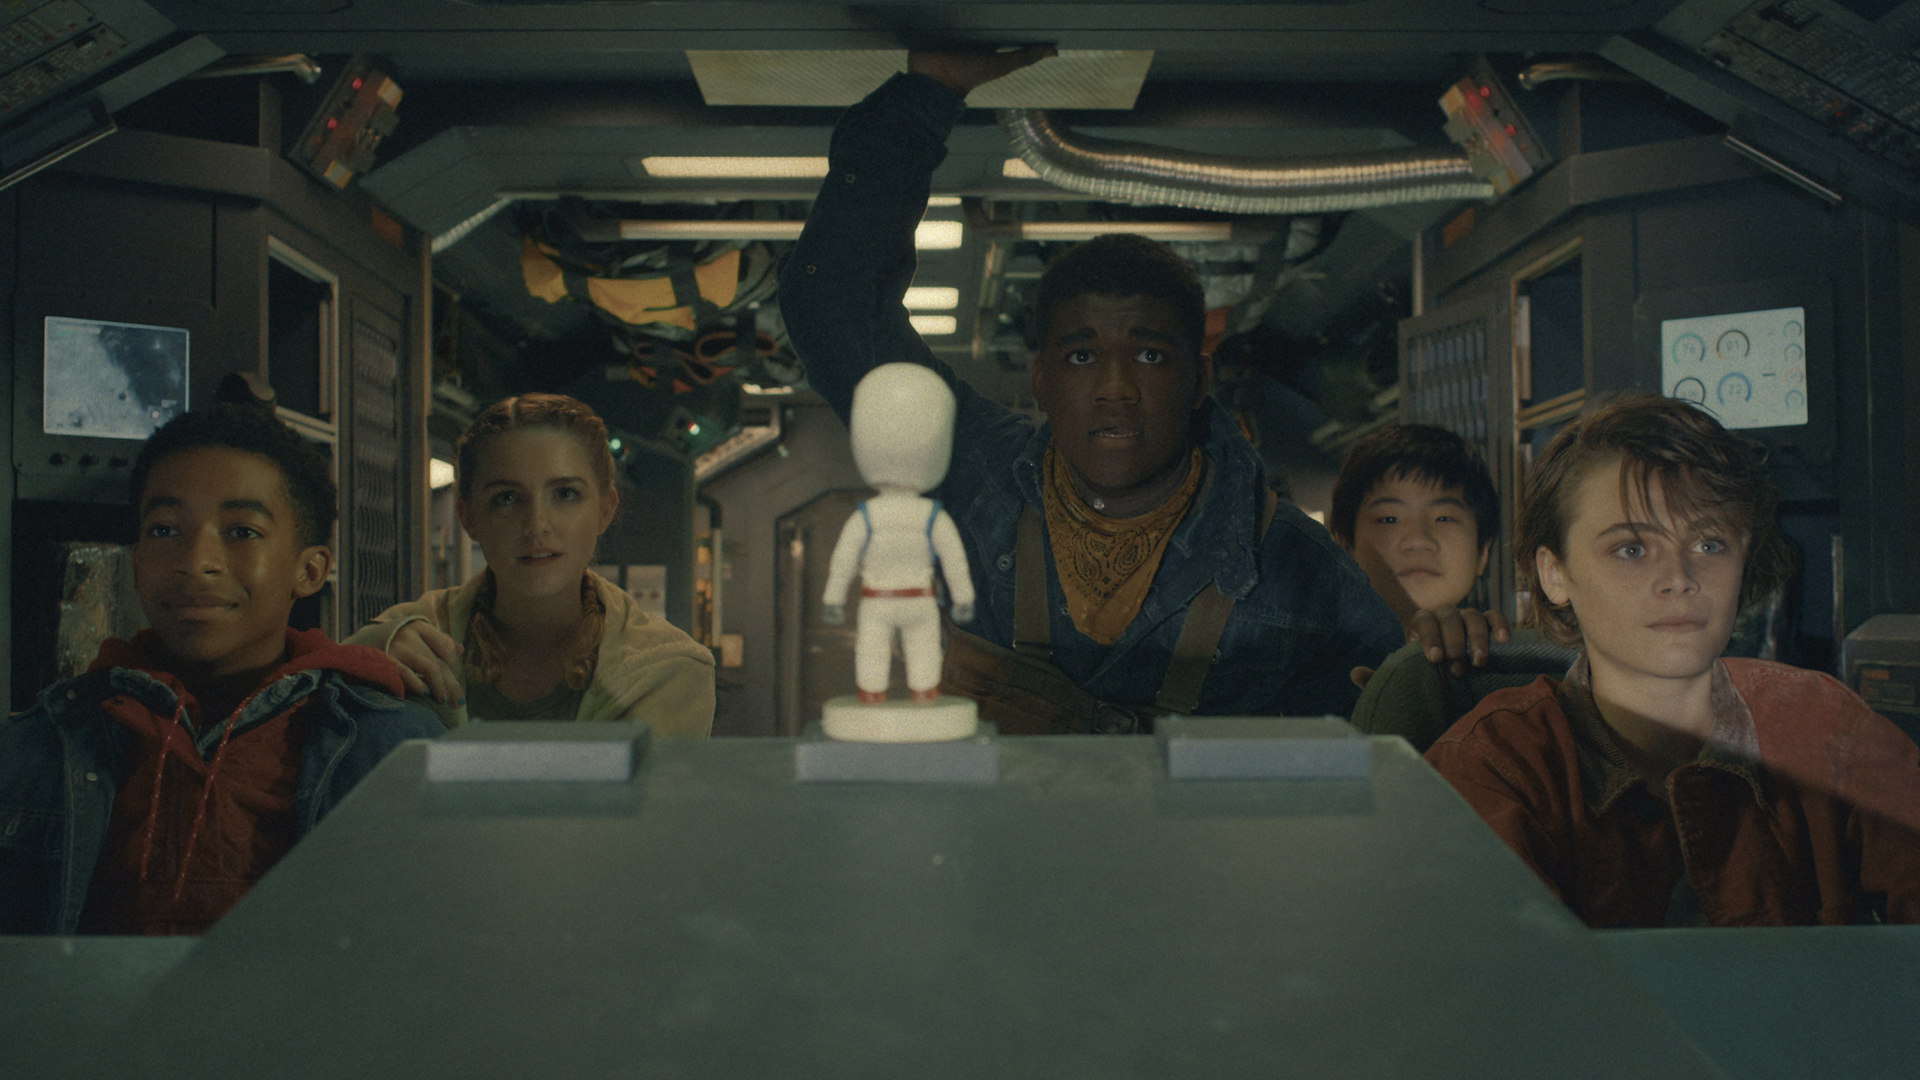 The main cast of the Crater movie driving in a moon mining vehicle